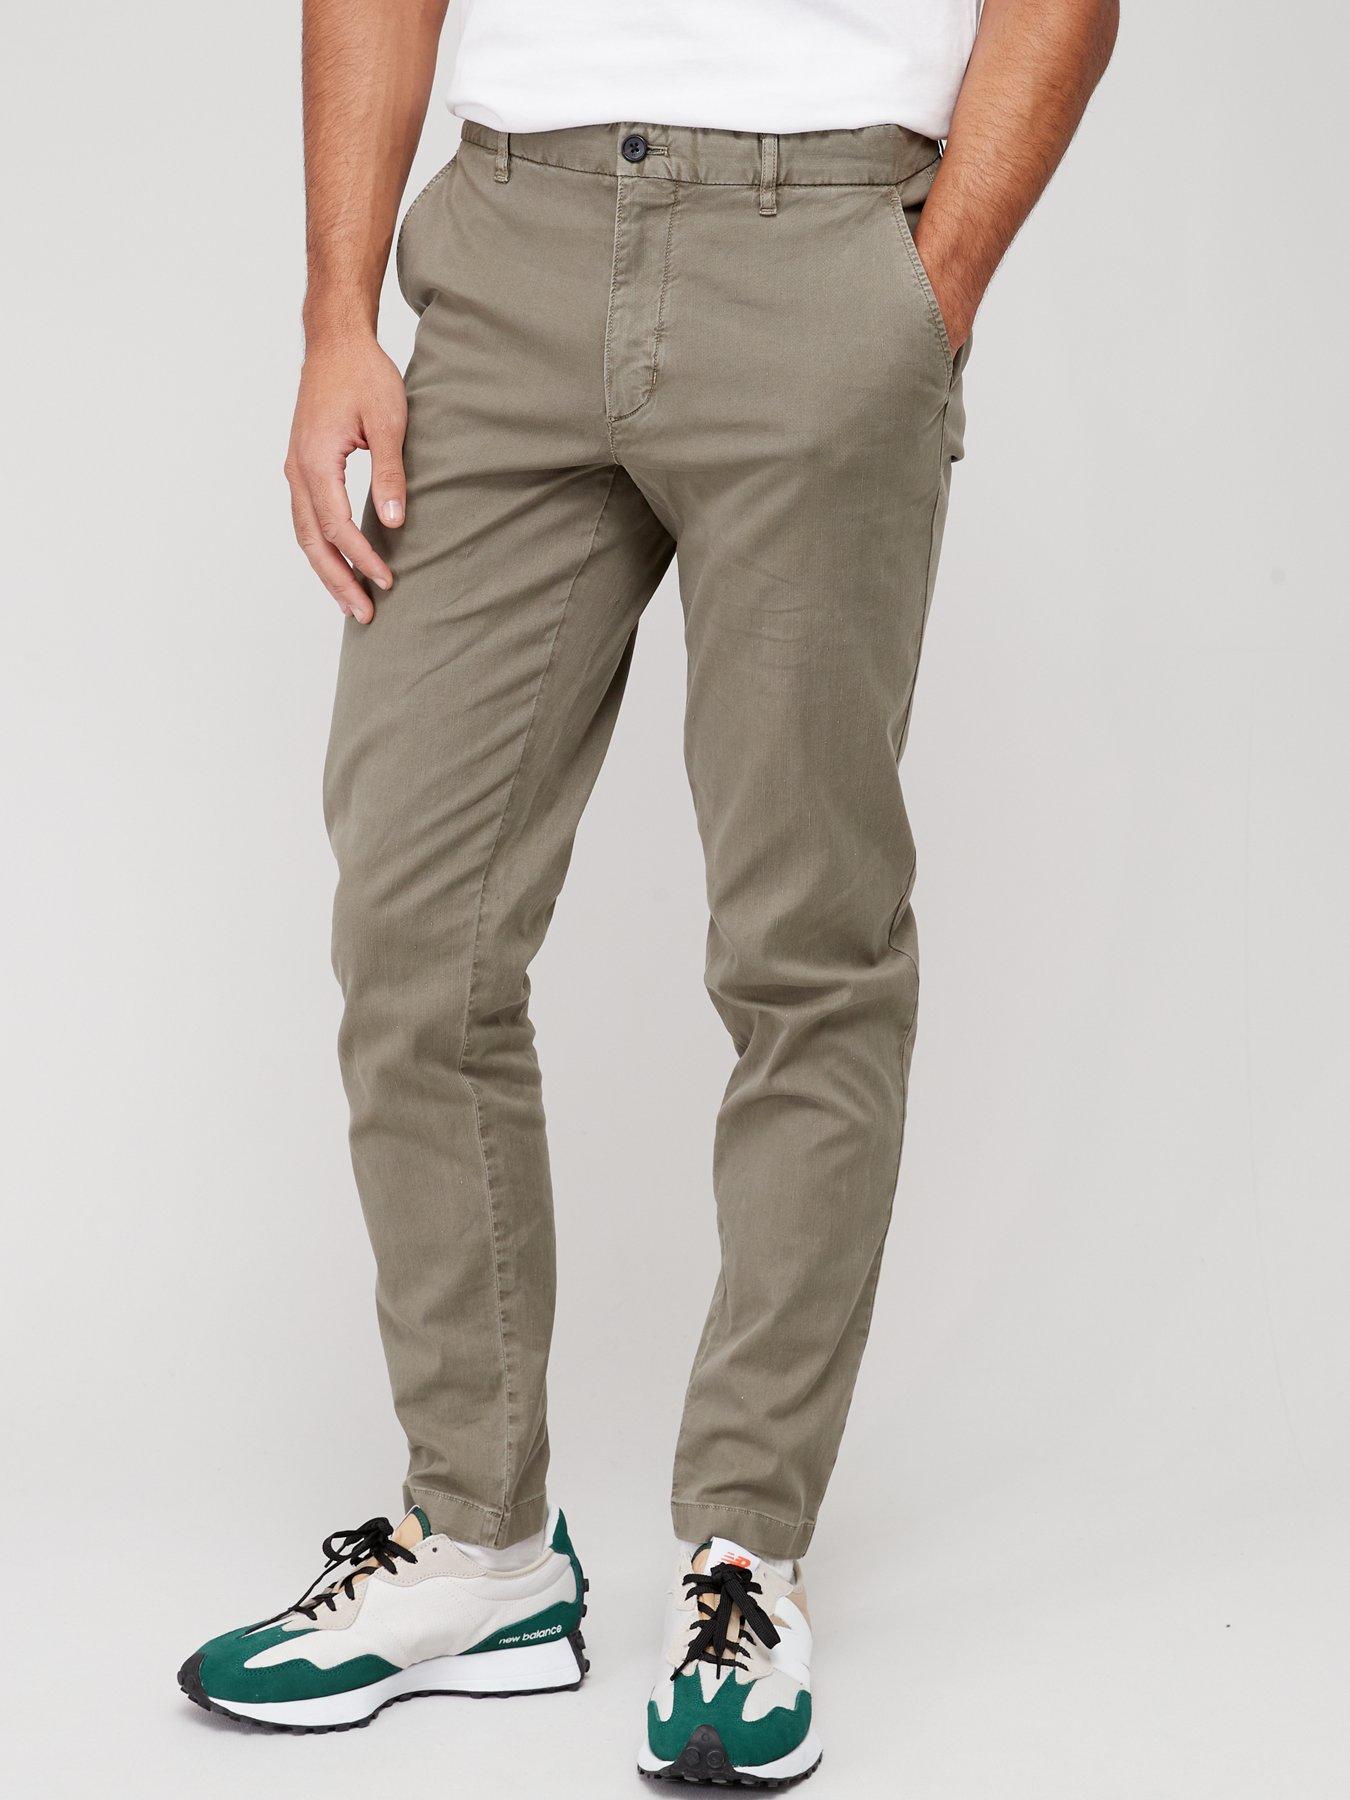 Tommy hilfiger | Trousers & chinos | Men |